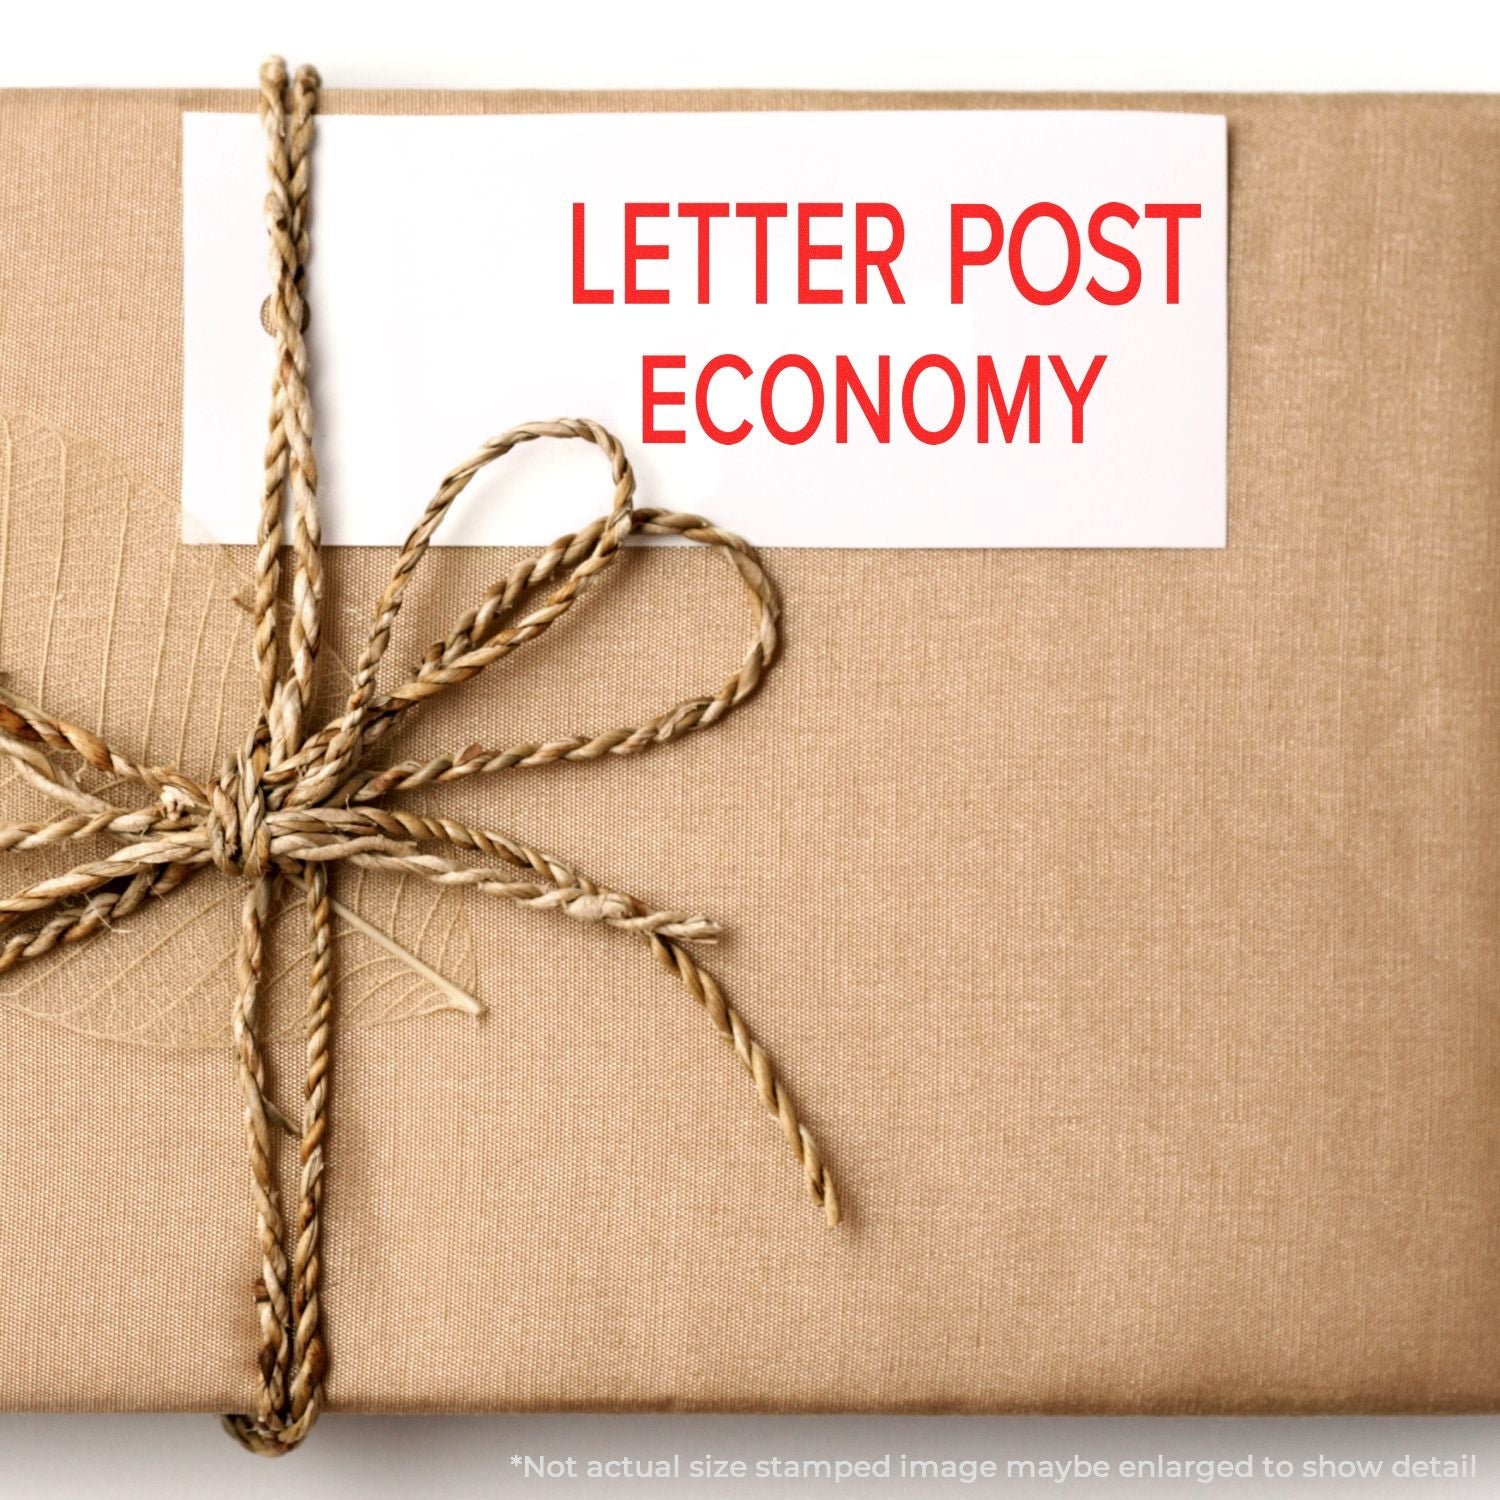 A self-inking stamp with a stamped image showing how the text "LETTER POST ECONOMY" is displayed after stamping.